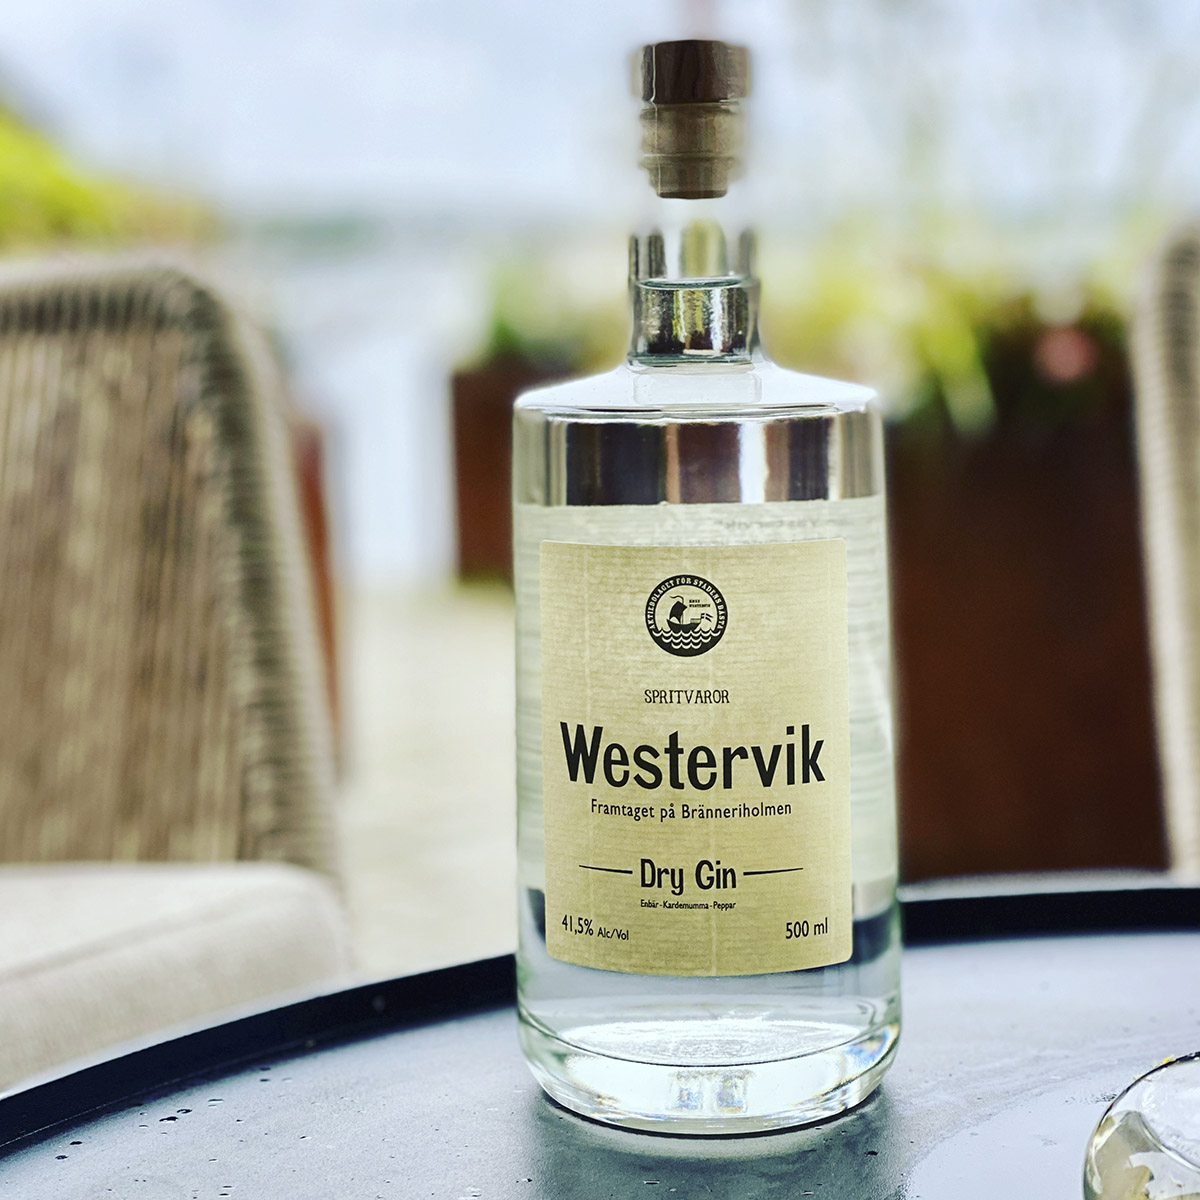 Westervik Gin: Swedish gin has been revived in this historic city of trade